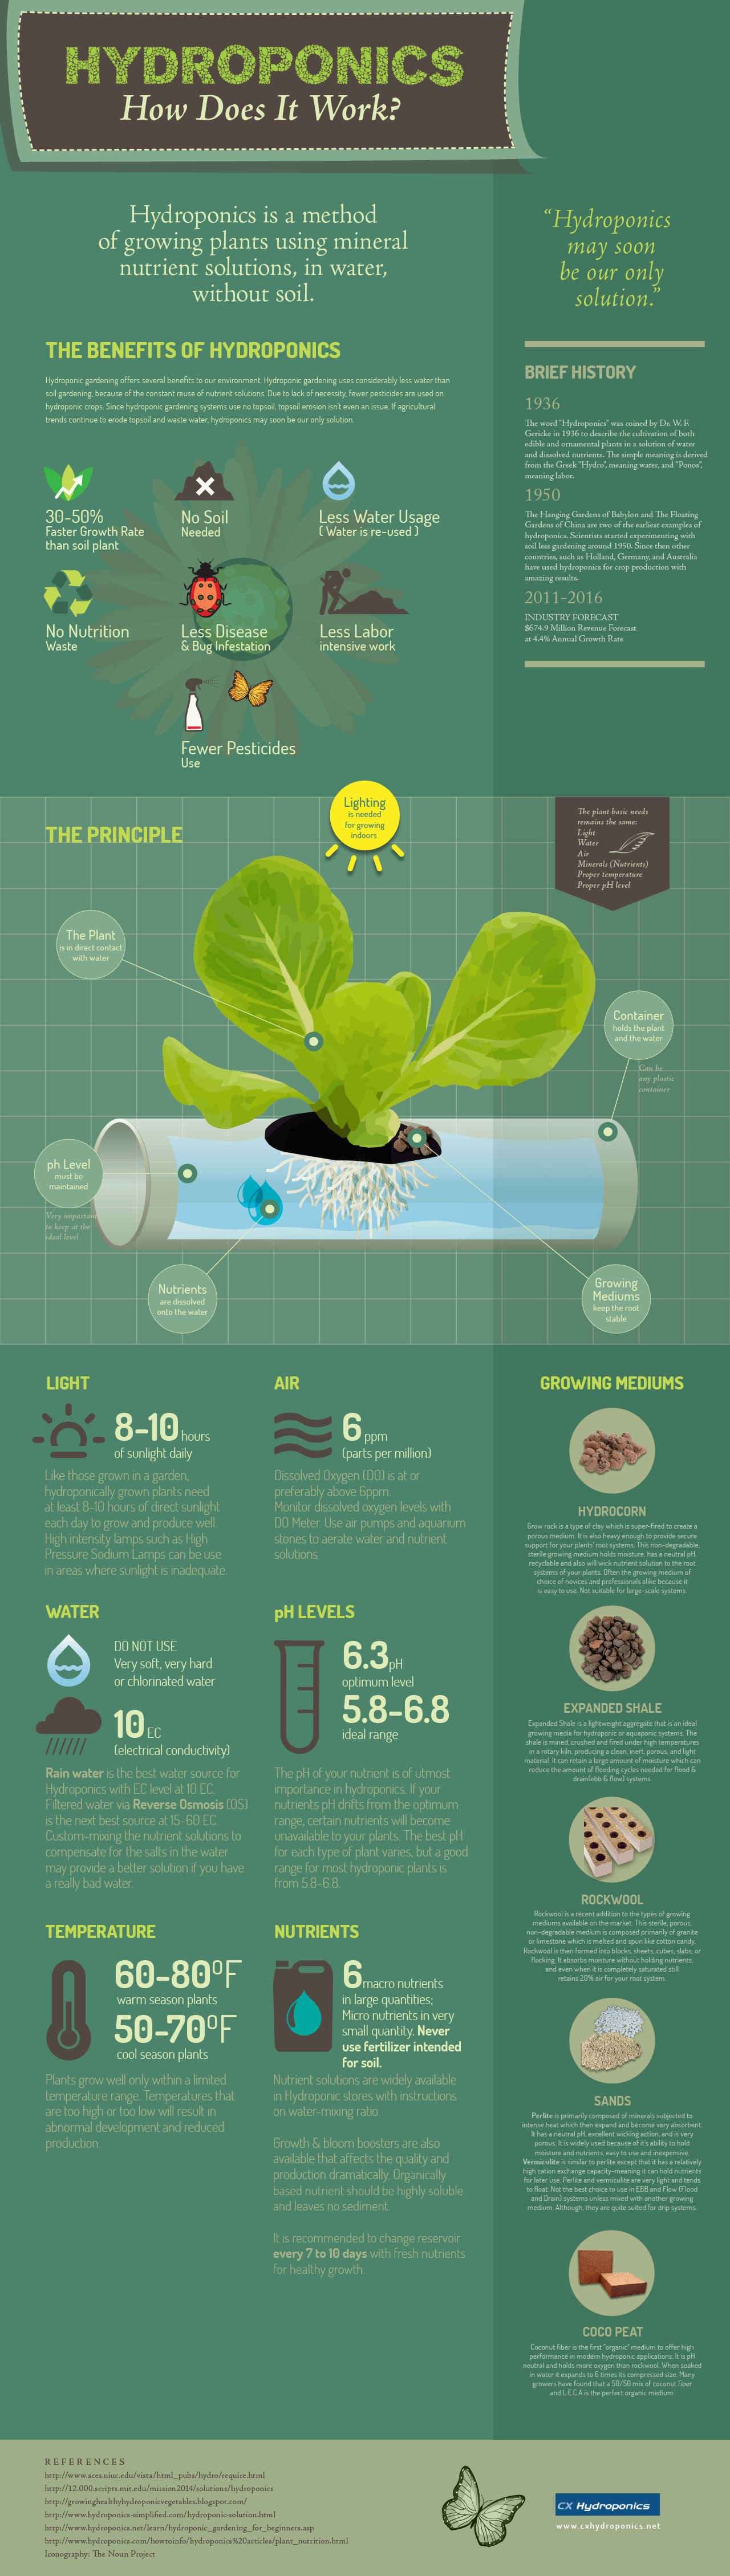 Hydroponics - how does it works?